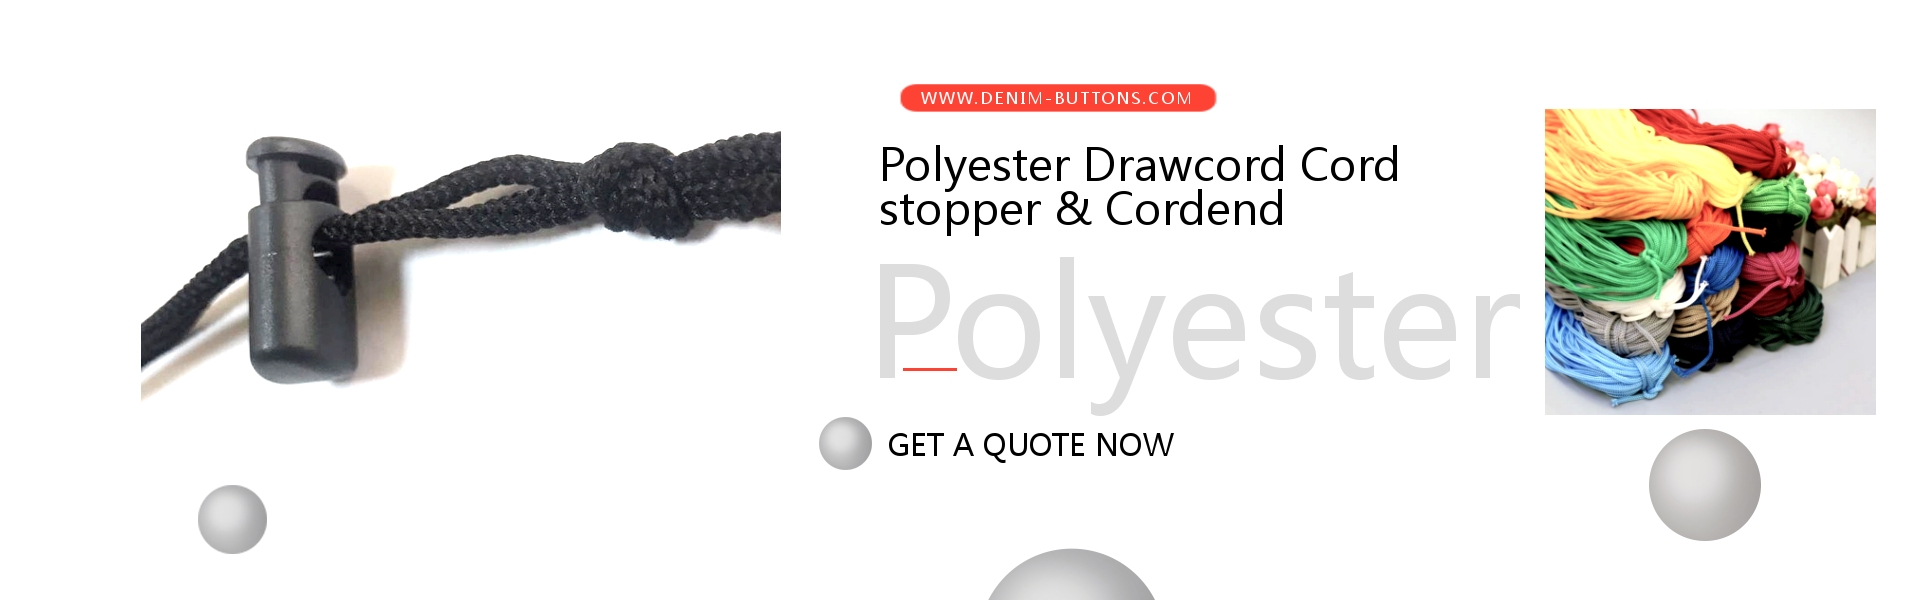 Polyester Drawcord With Plastic Toggle